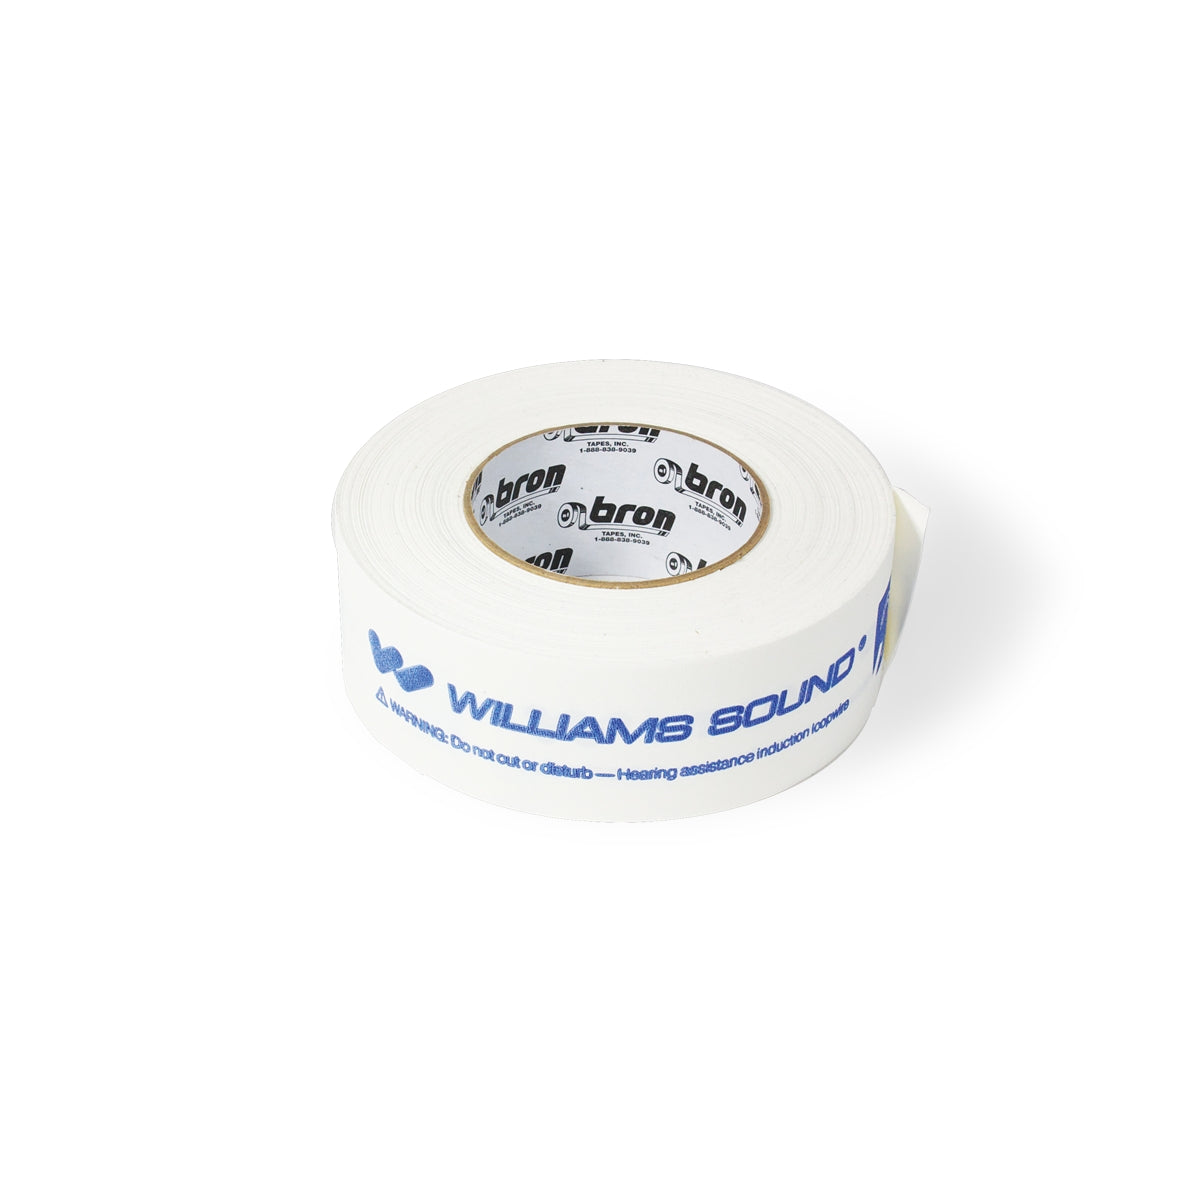 Williams Sound FWT 001 | Cloth Based Flat Wire Warning Tape